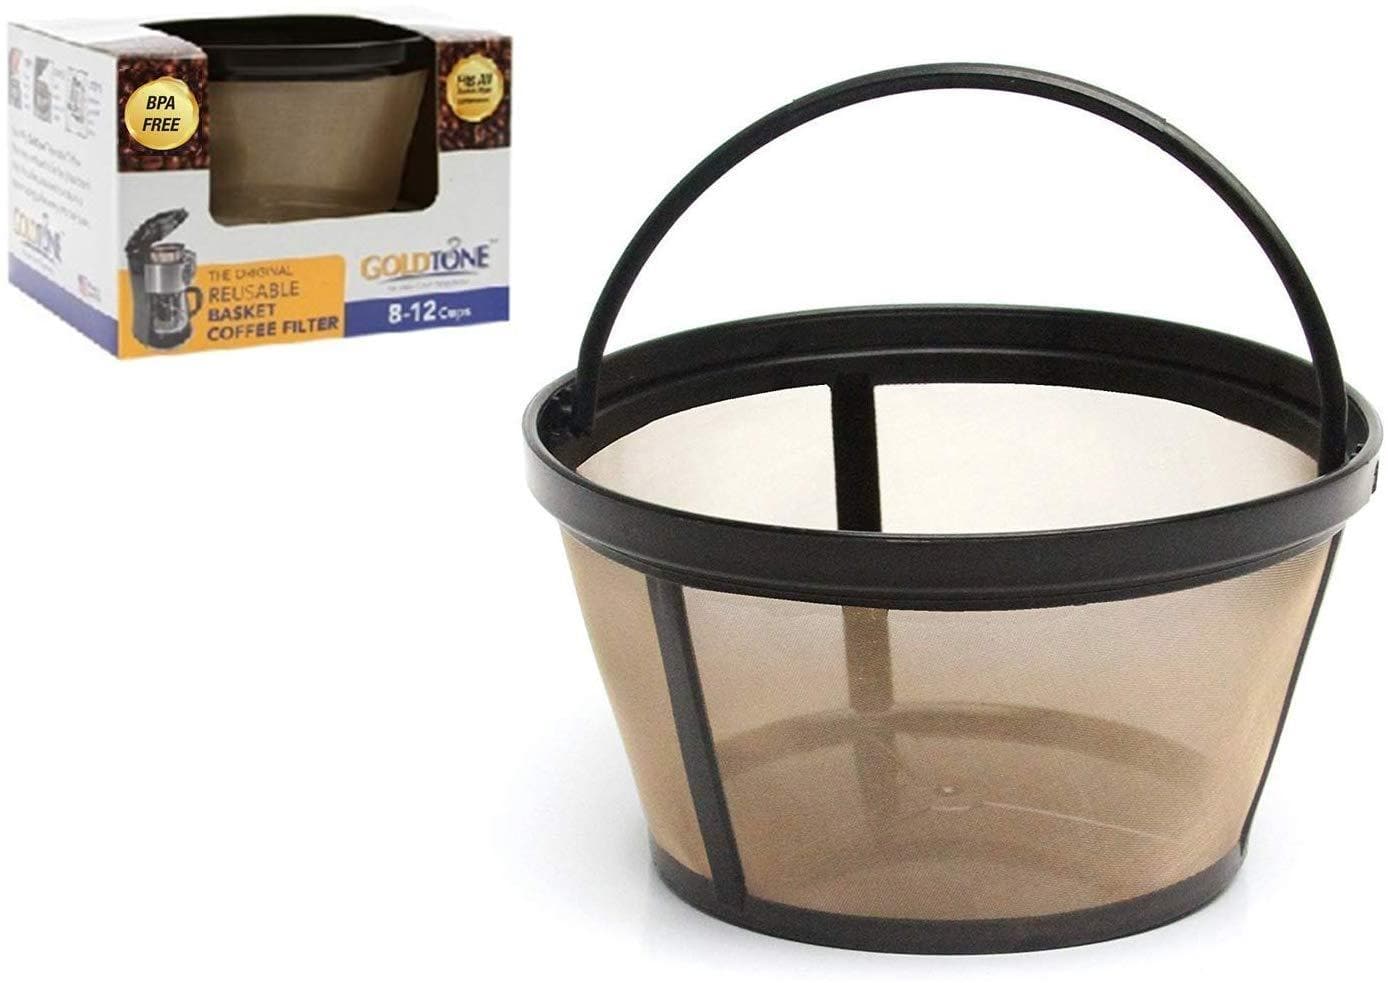 8-12 Cup Reusable Basket Permanent Coffee Filters, Perfect Fit for 8-12 Cup Mr. Coffee, Black and Decker Krups Basket-Style Coffee Maker Filters and B